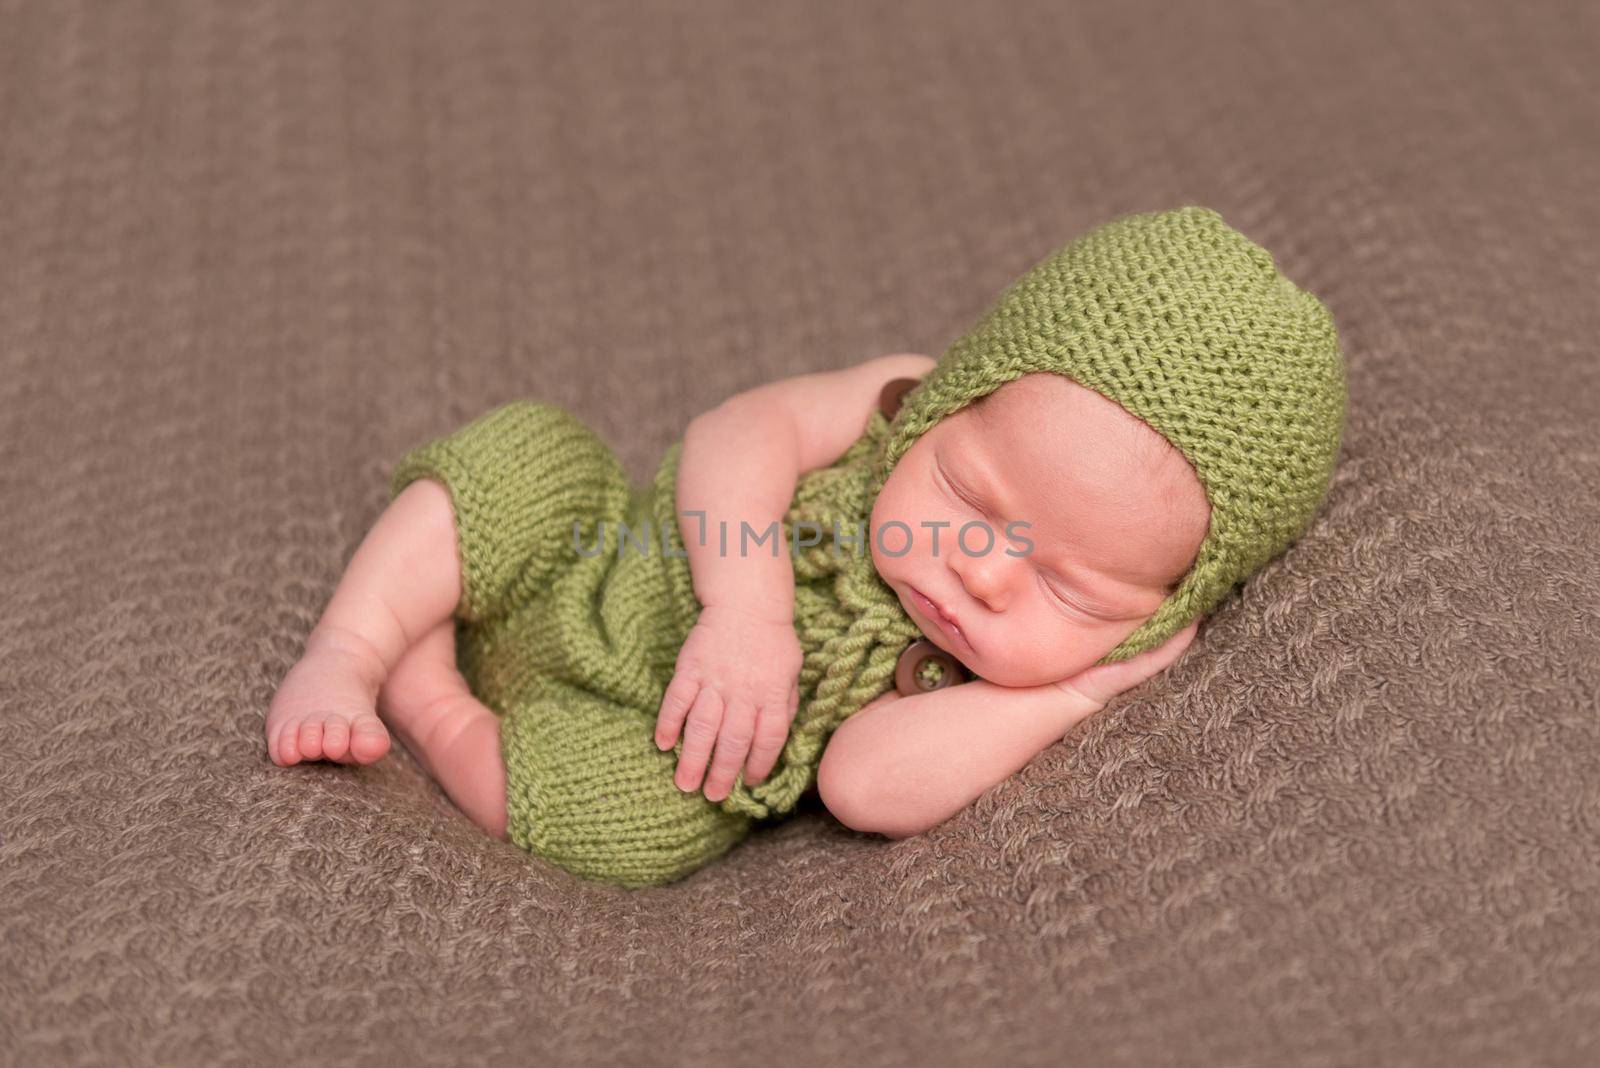 Cute newborn in a knitted green hat sleeping on a soft blanket